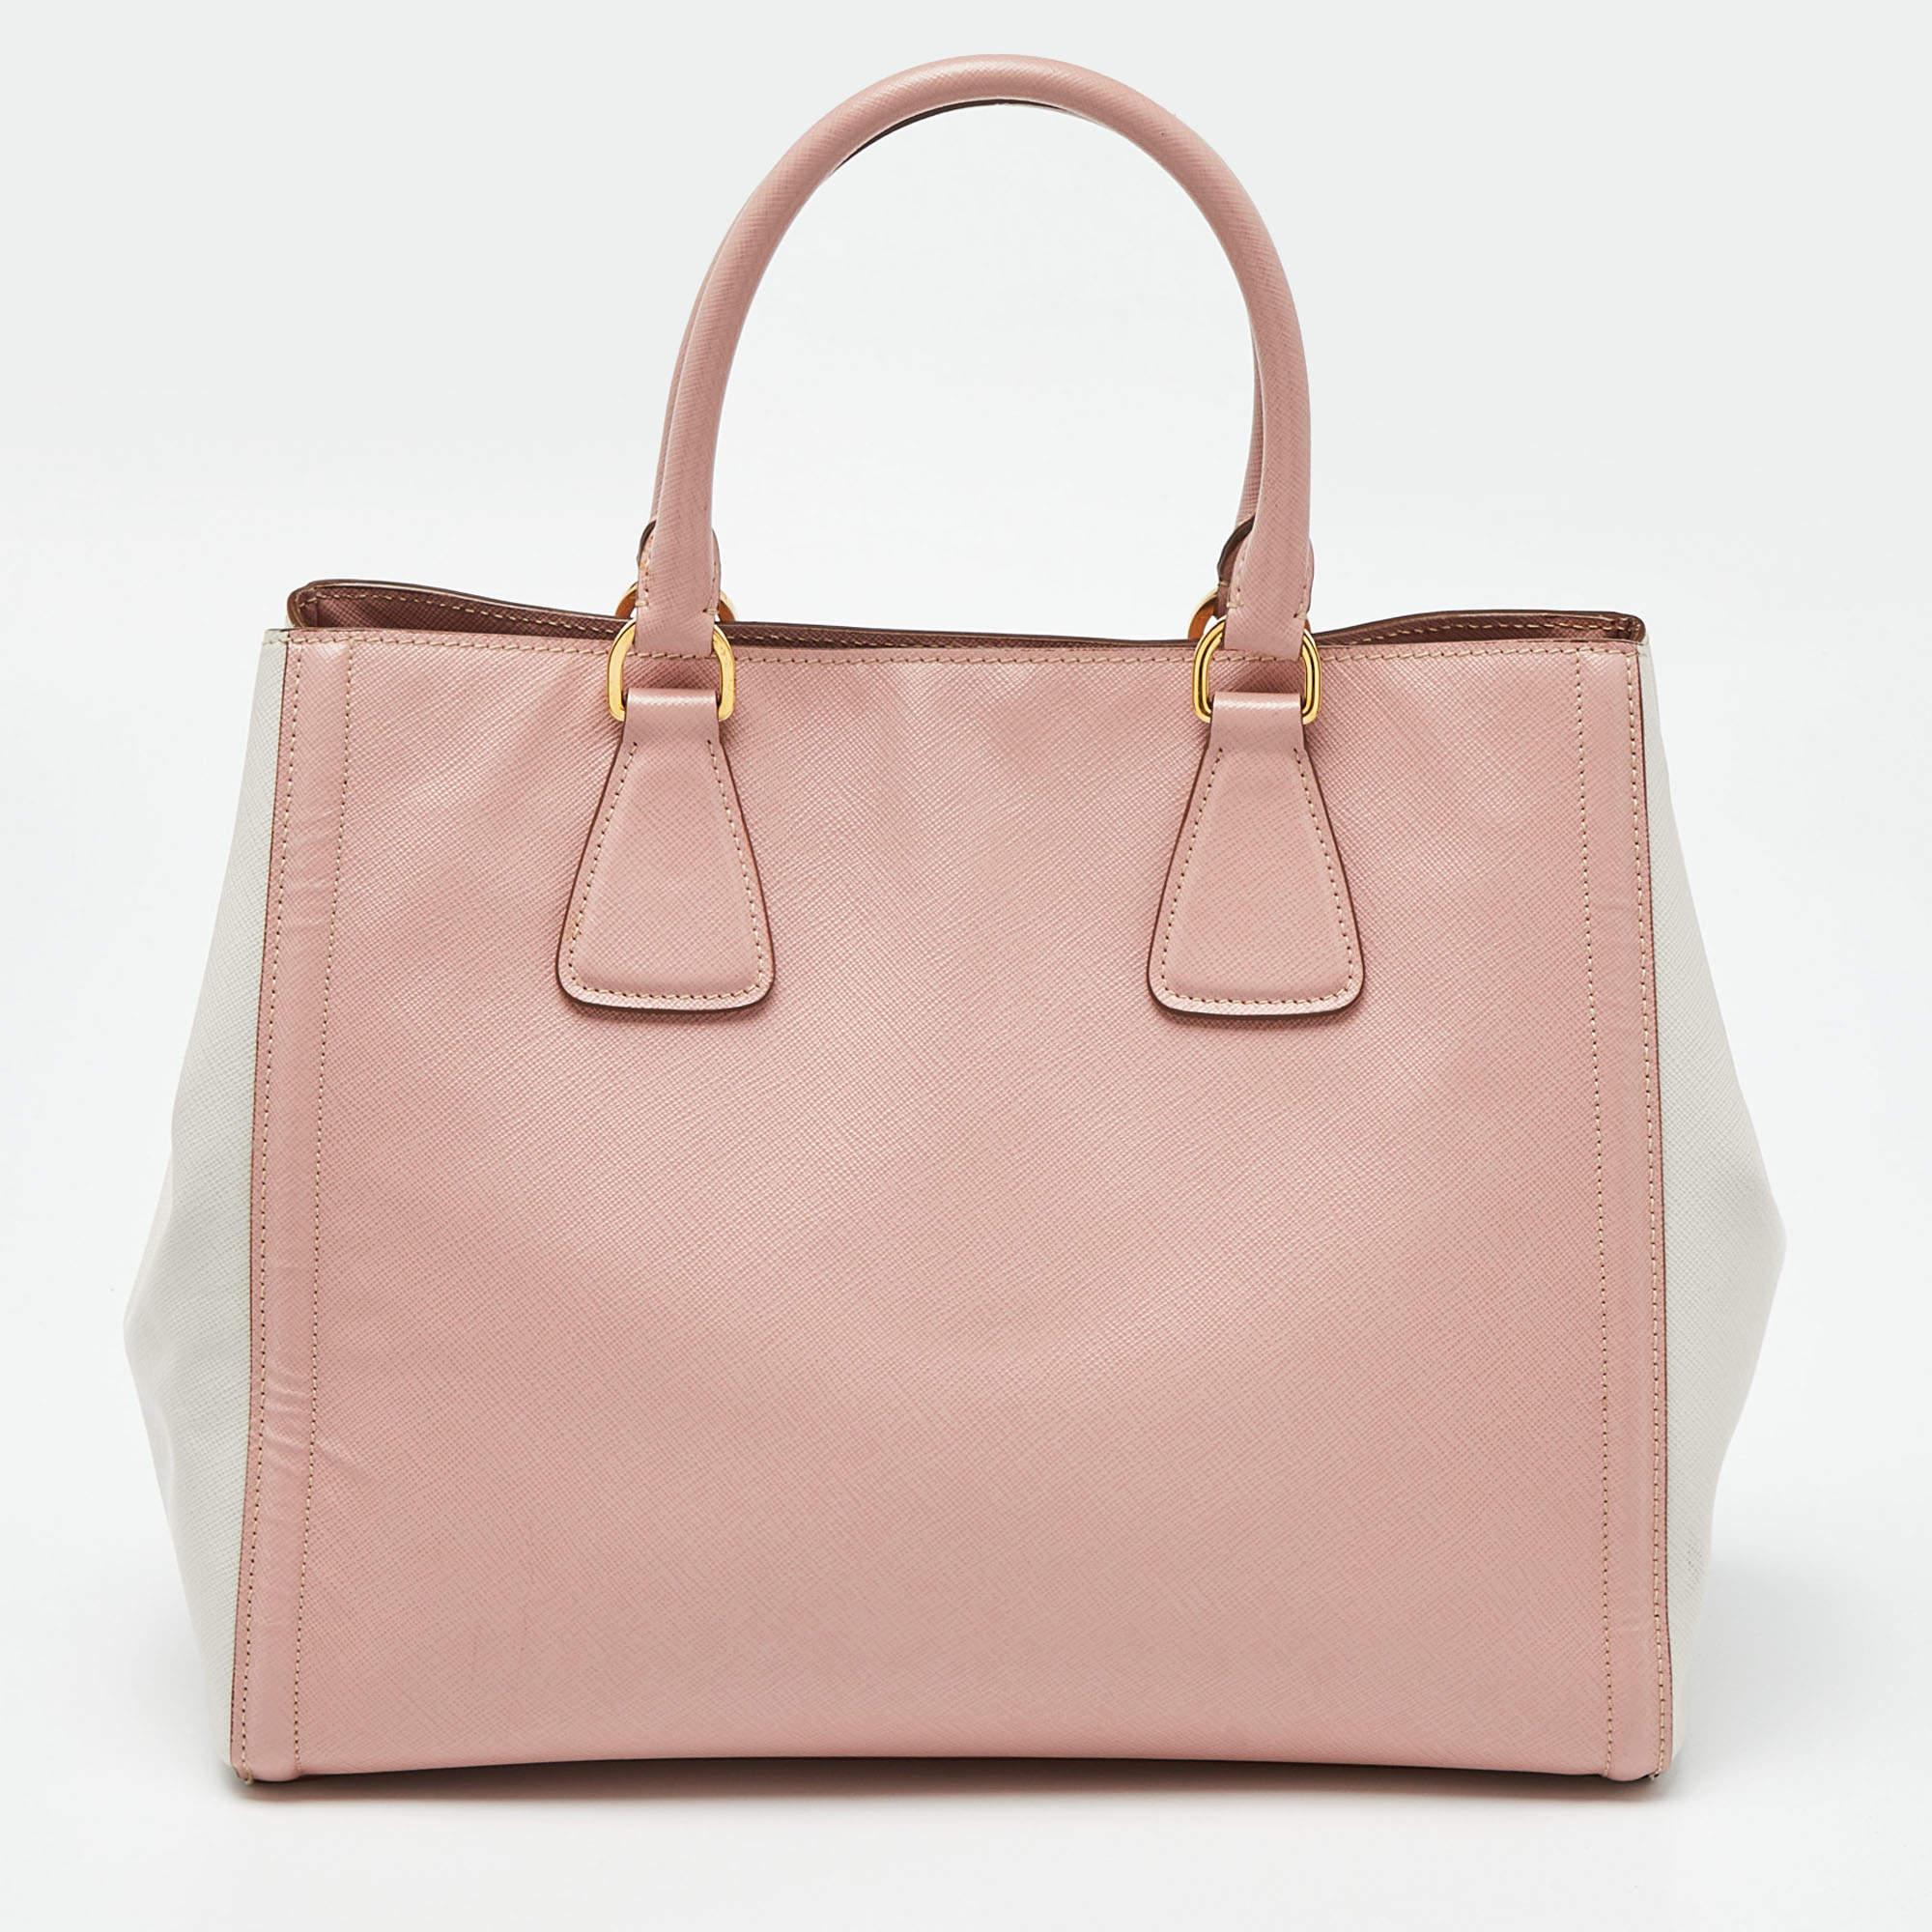 Striking a beautiful balance between essentiality and opulence, this tote from the House of Prada ensures that your handbag requirements are taken care of. It is equipped with practical features for all-day ease.

Includes: Detachable Strap,